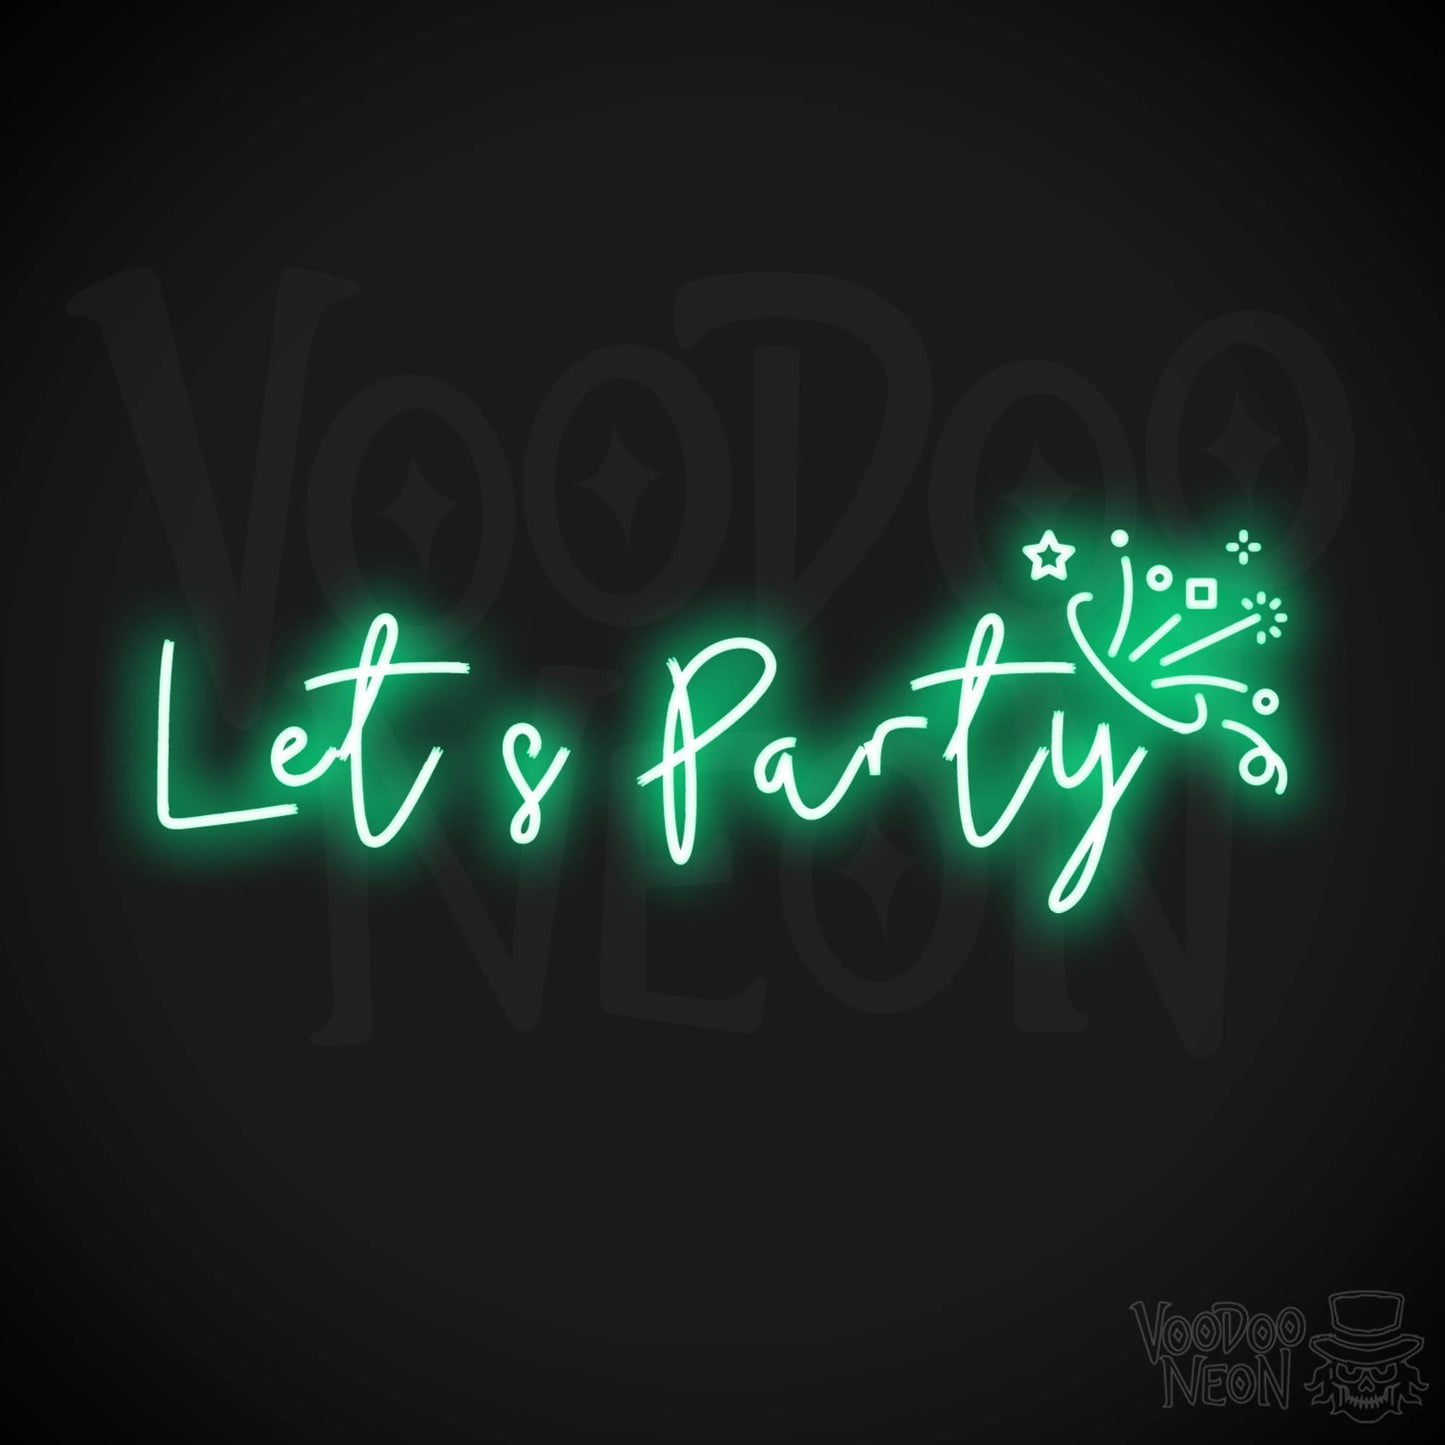 Let's Party Neon Sign - Neon Let's Party Sign - Bar LED Sign - Color Green